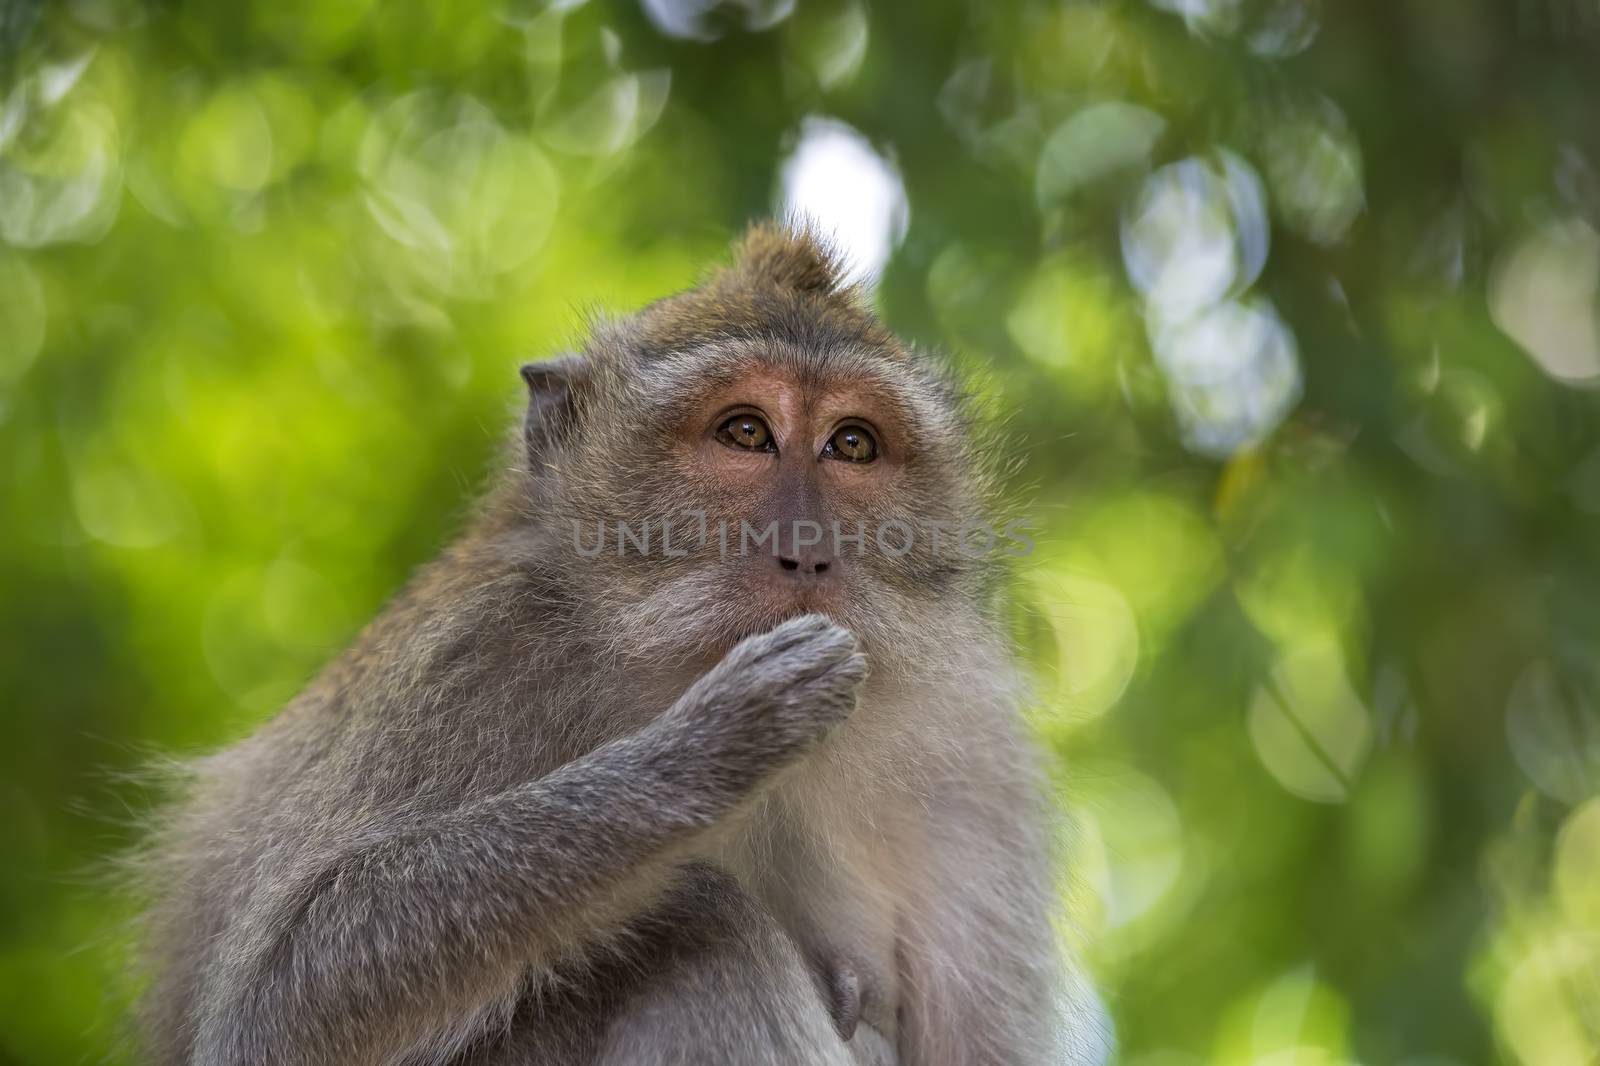 Long-tailed Macaque Monkey by kjorgen